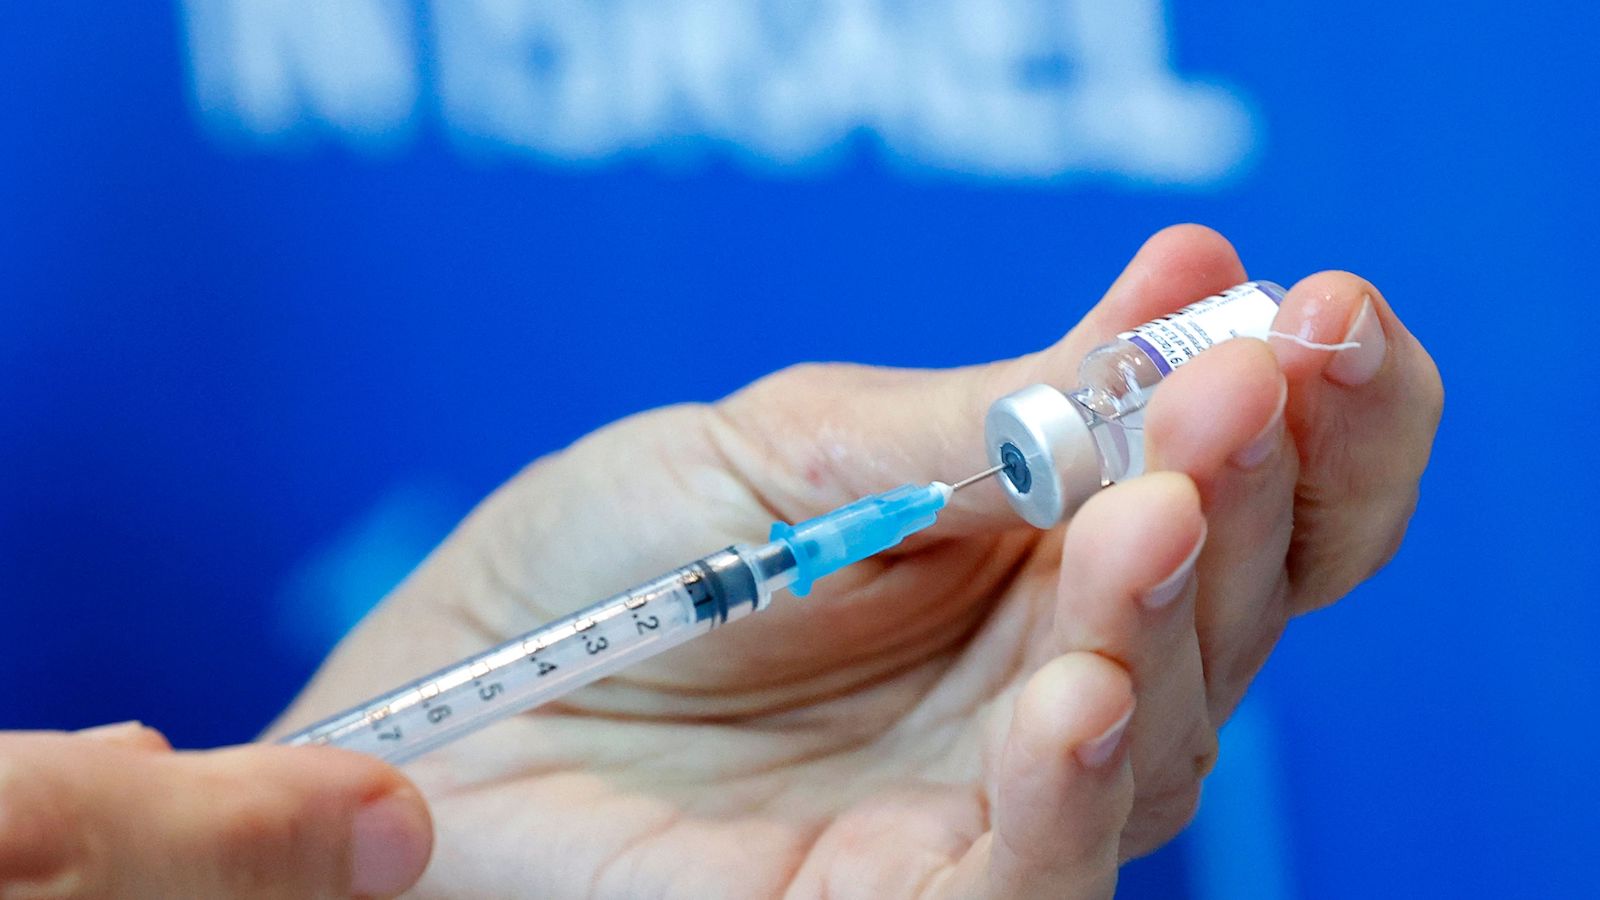 Pfizer’s vaccine against the Omicron variant will be ready in March